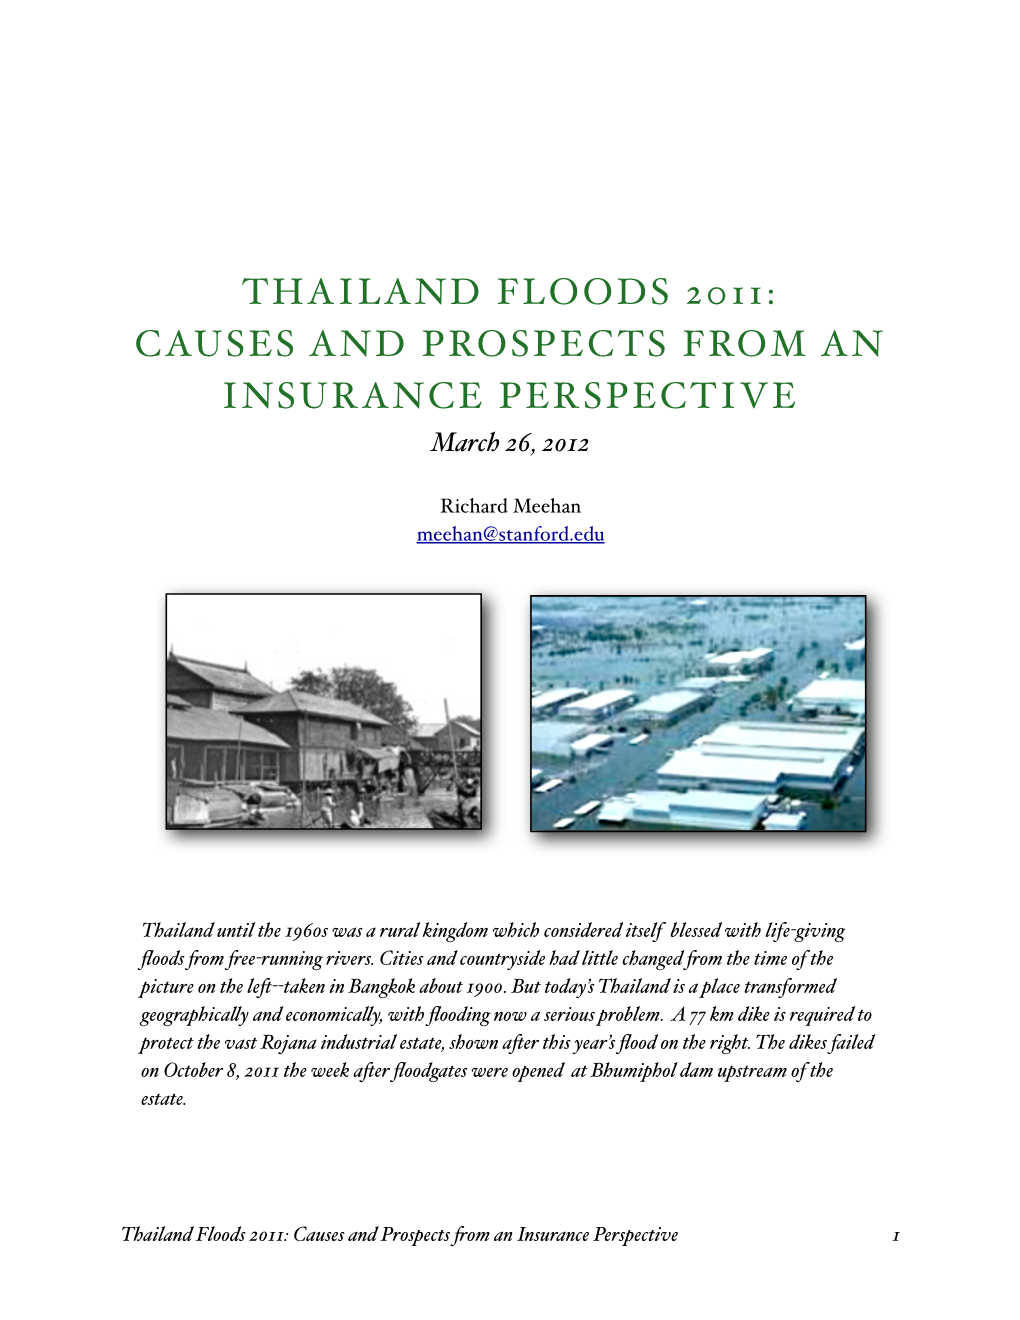 THAILAND FLOODS 2011: CAUSES and PROSPECTS from an INSURANCE PERSPECTIVE March 26, 2012